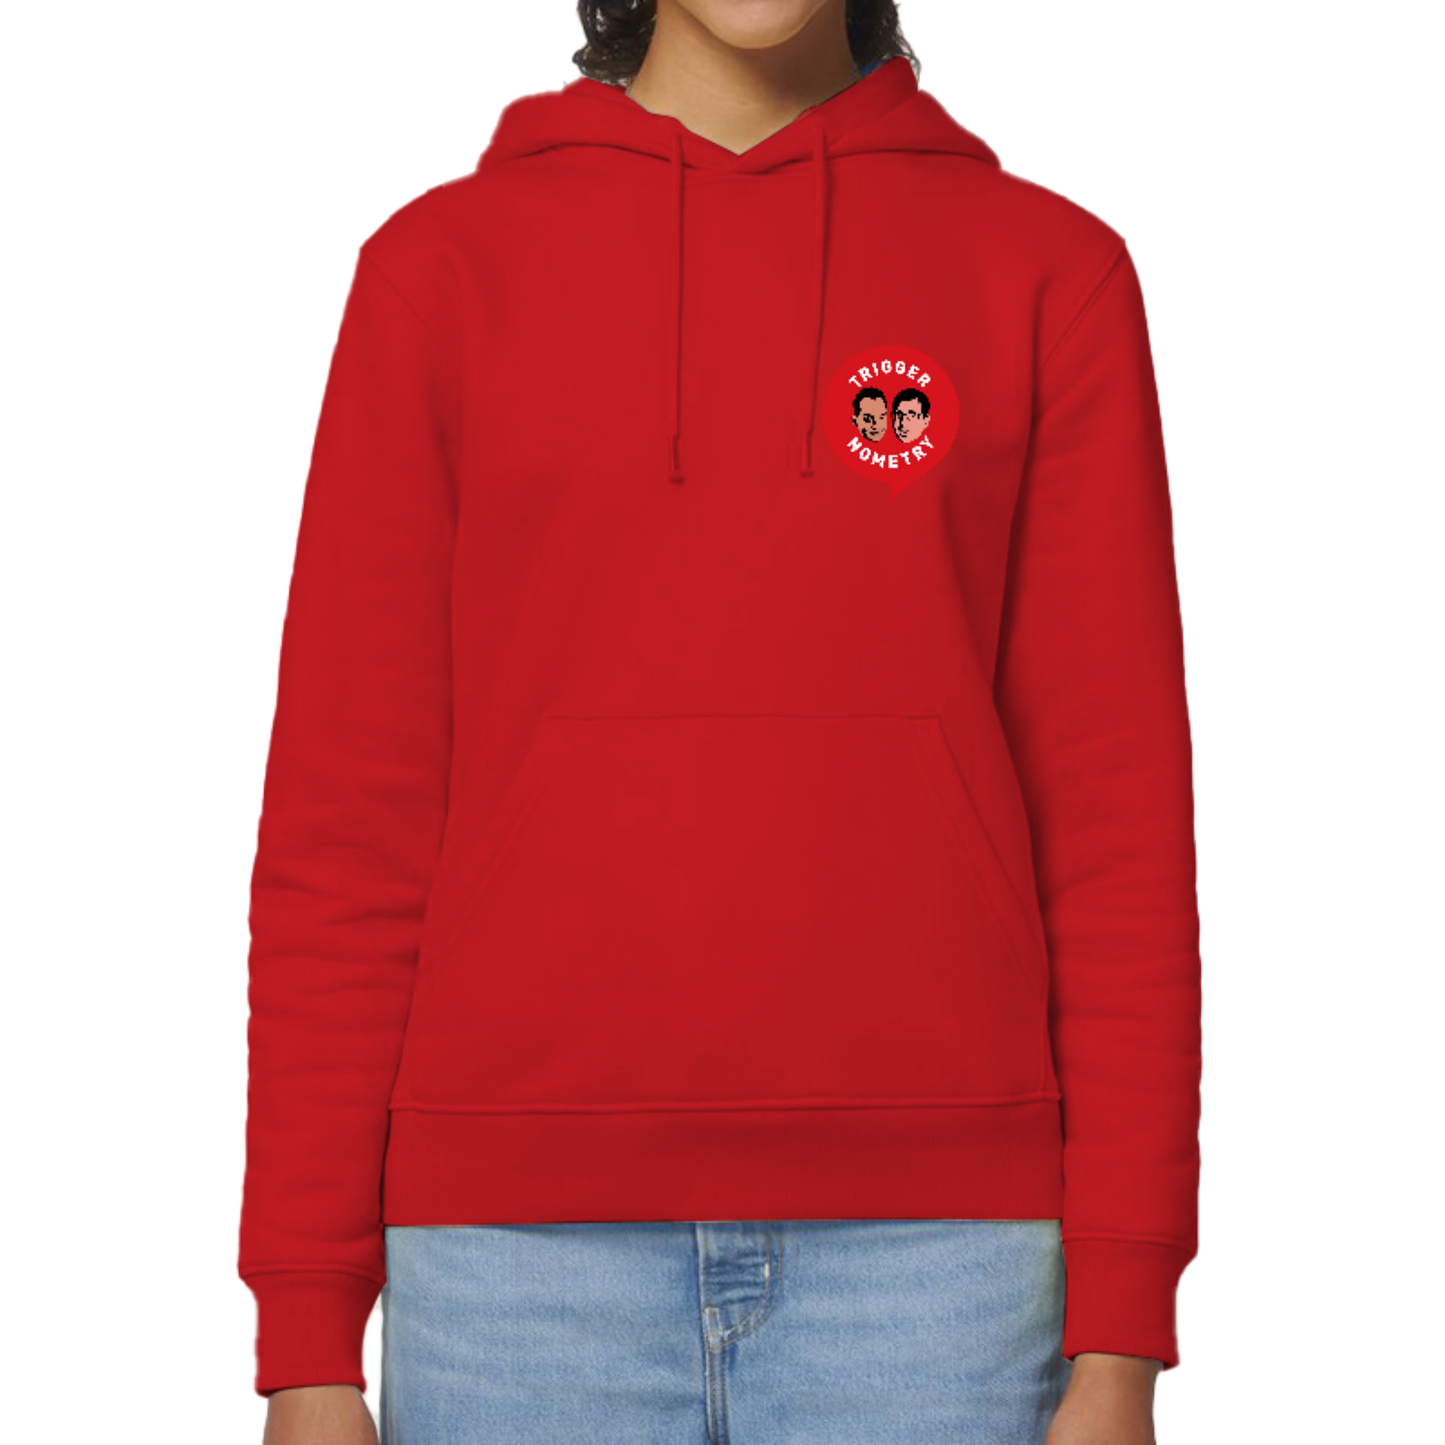 TRIGGERnometry Lads Women's Pullover Hoodie